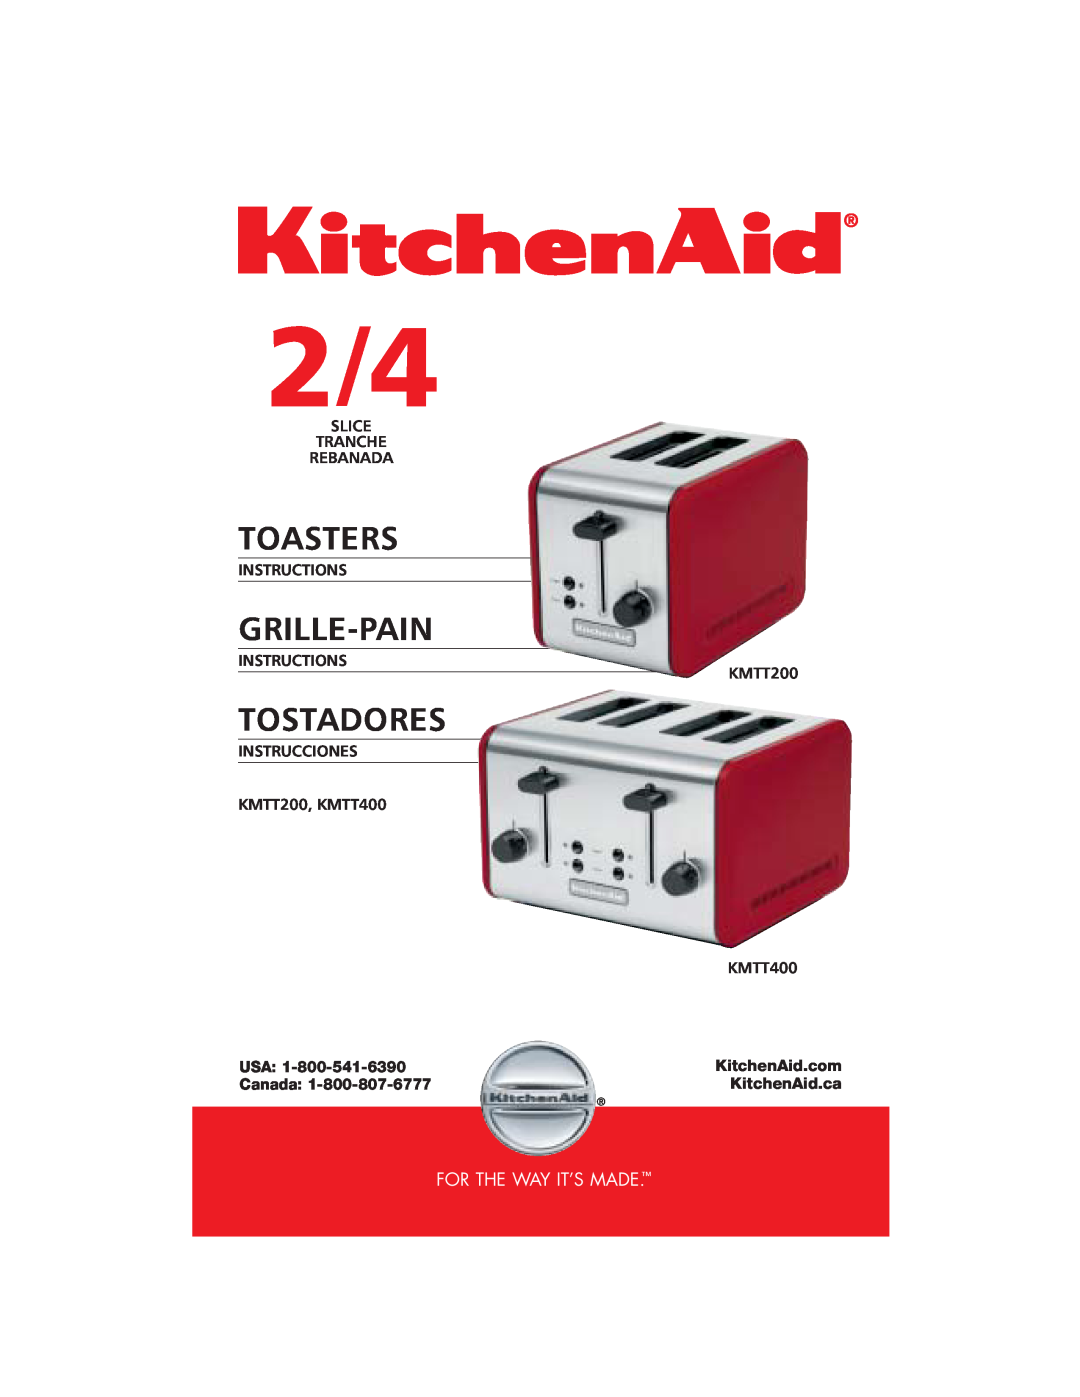 KitchenAid KMTT200 manual For The Way It’S Made, 2 /4, Toasters, Grille-Pain, Tostadores 